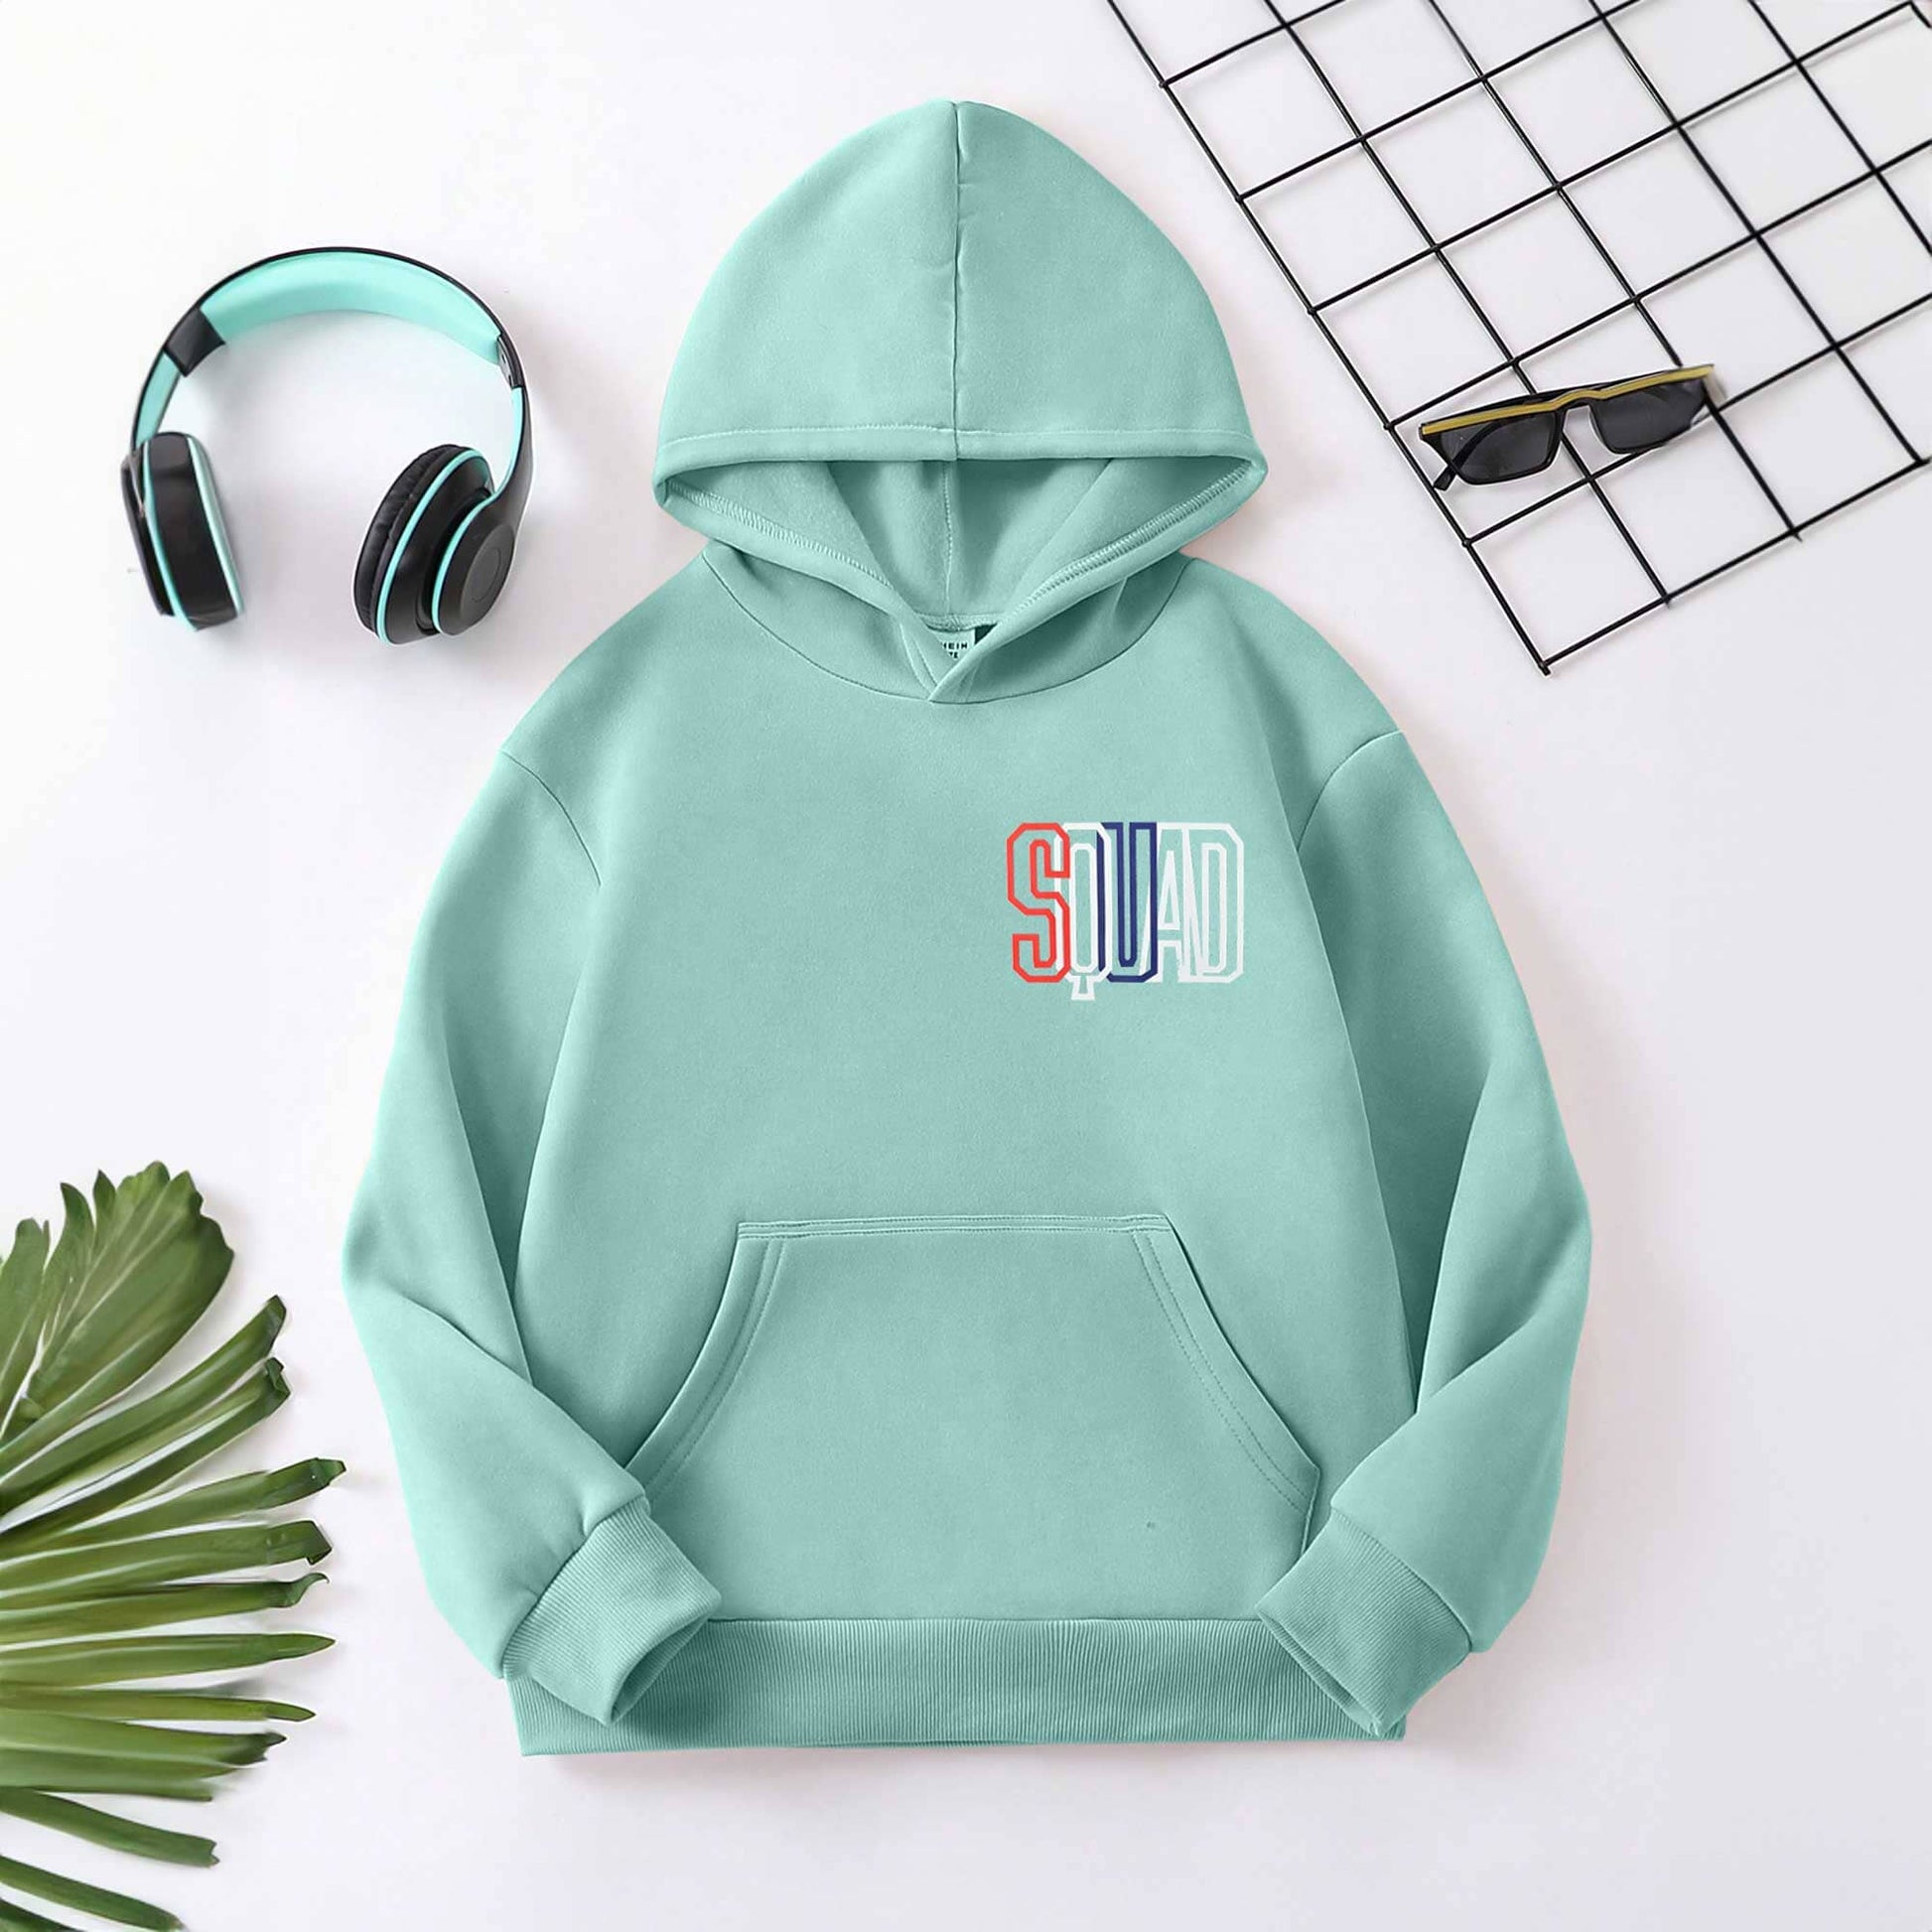 Rabbit Skins Boy's Squad Printed Pullover Hoodie Boy's Pullover Hoodie SNR Turquoise XS (8-9 Years) 